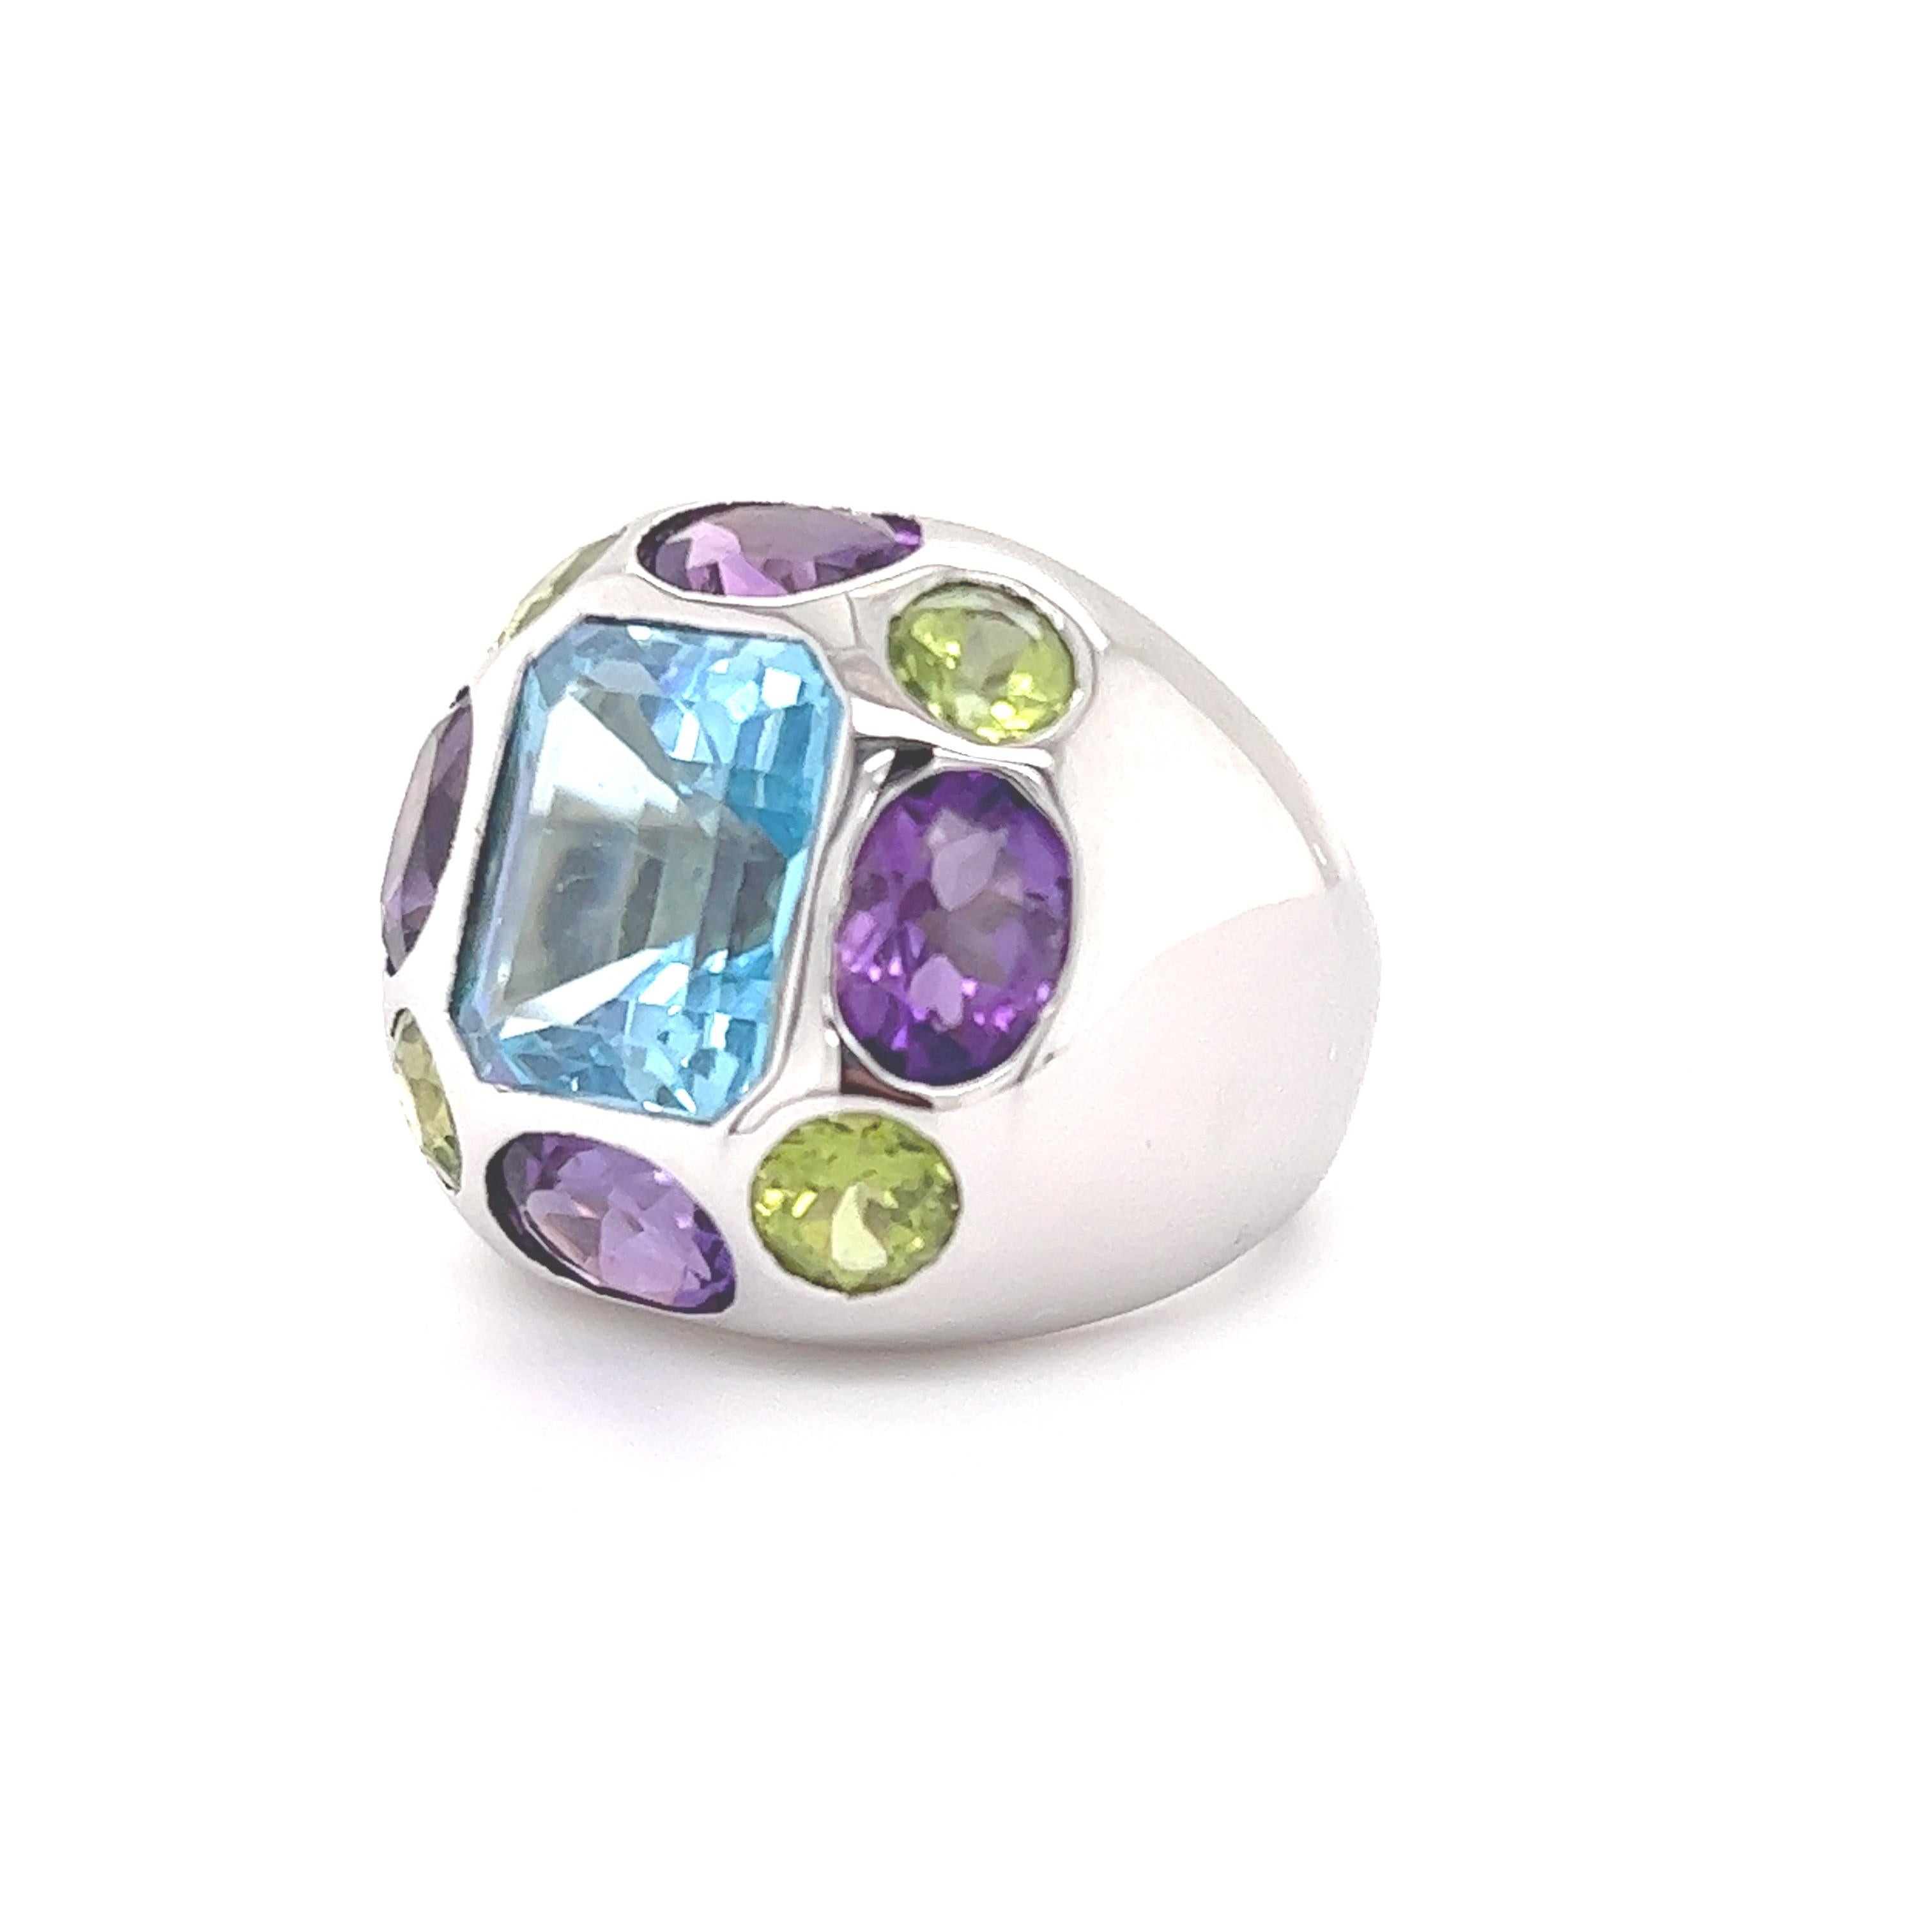 Beautiful ring that pops with color. The design was made famous by Chanel with their Coco Baroque collection. Byzantine inspired, the ring combines creativity and extravagance. The ring for your consideration today was not made by Chanel, however